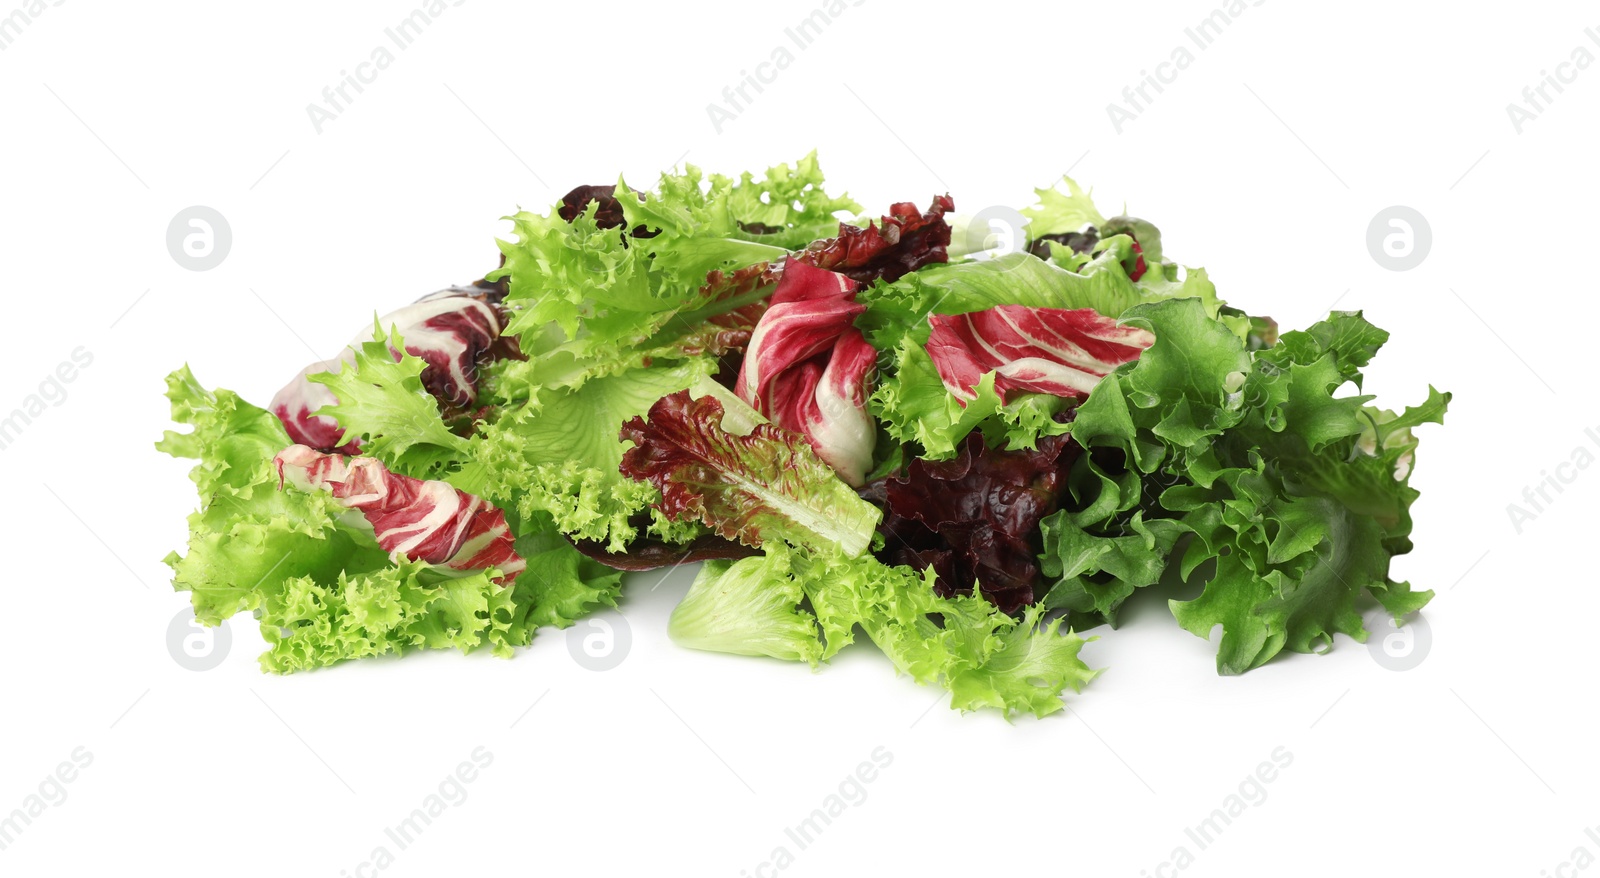 Photo of Leaves of different lettuces on white background